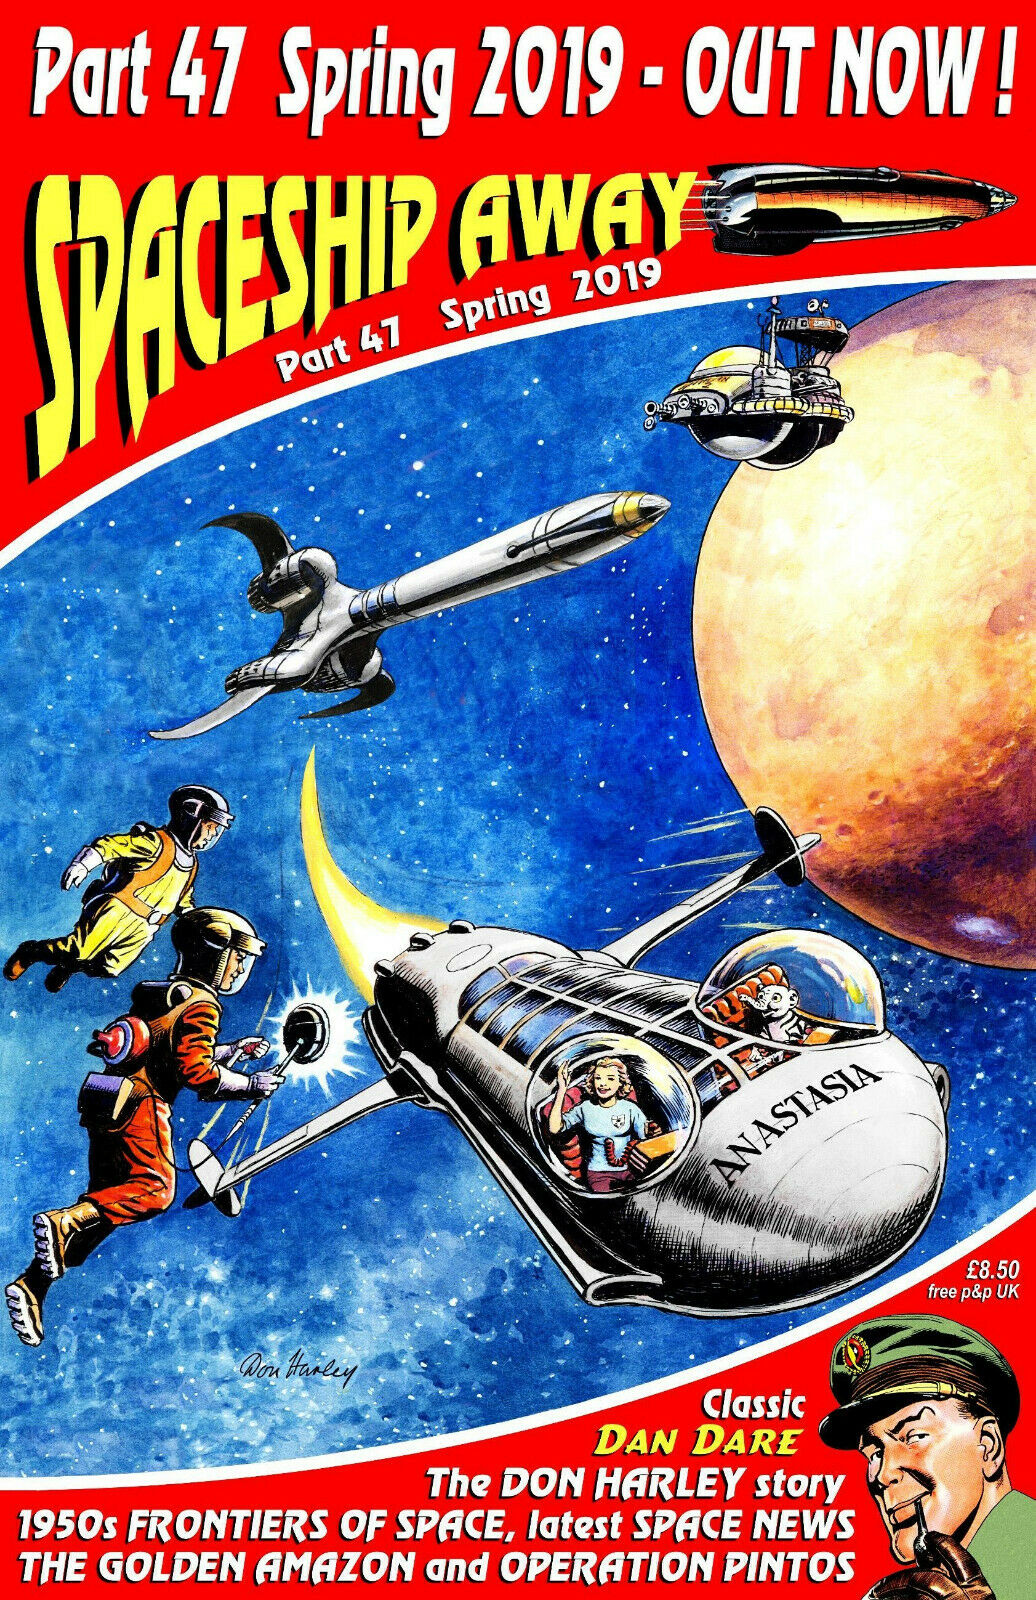 Spaceship Away Issue 47 - Cover